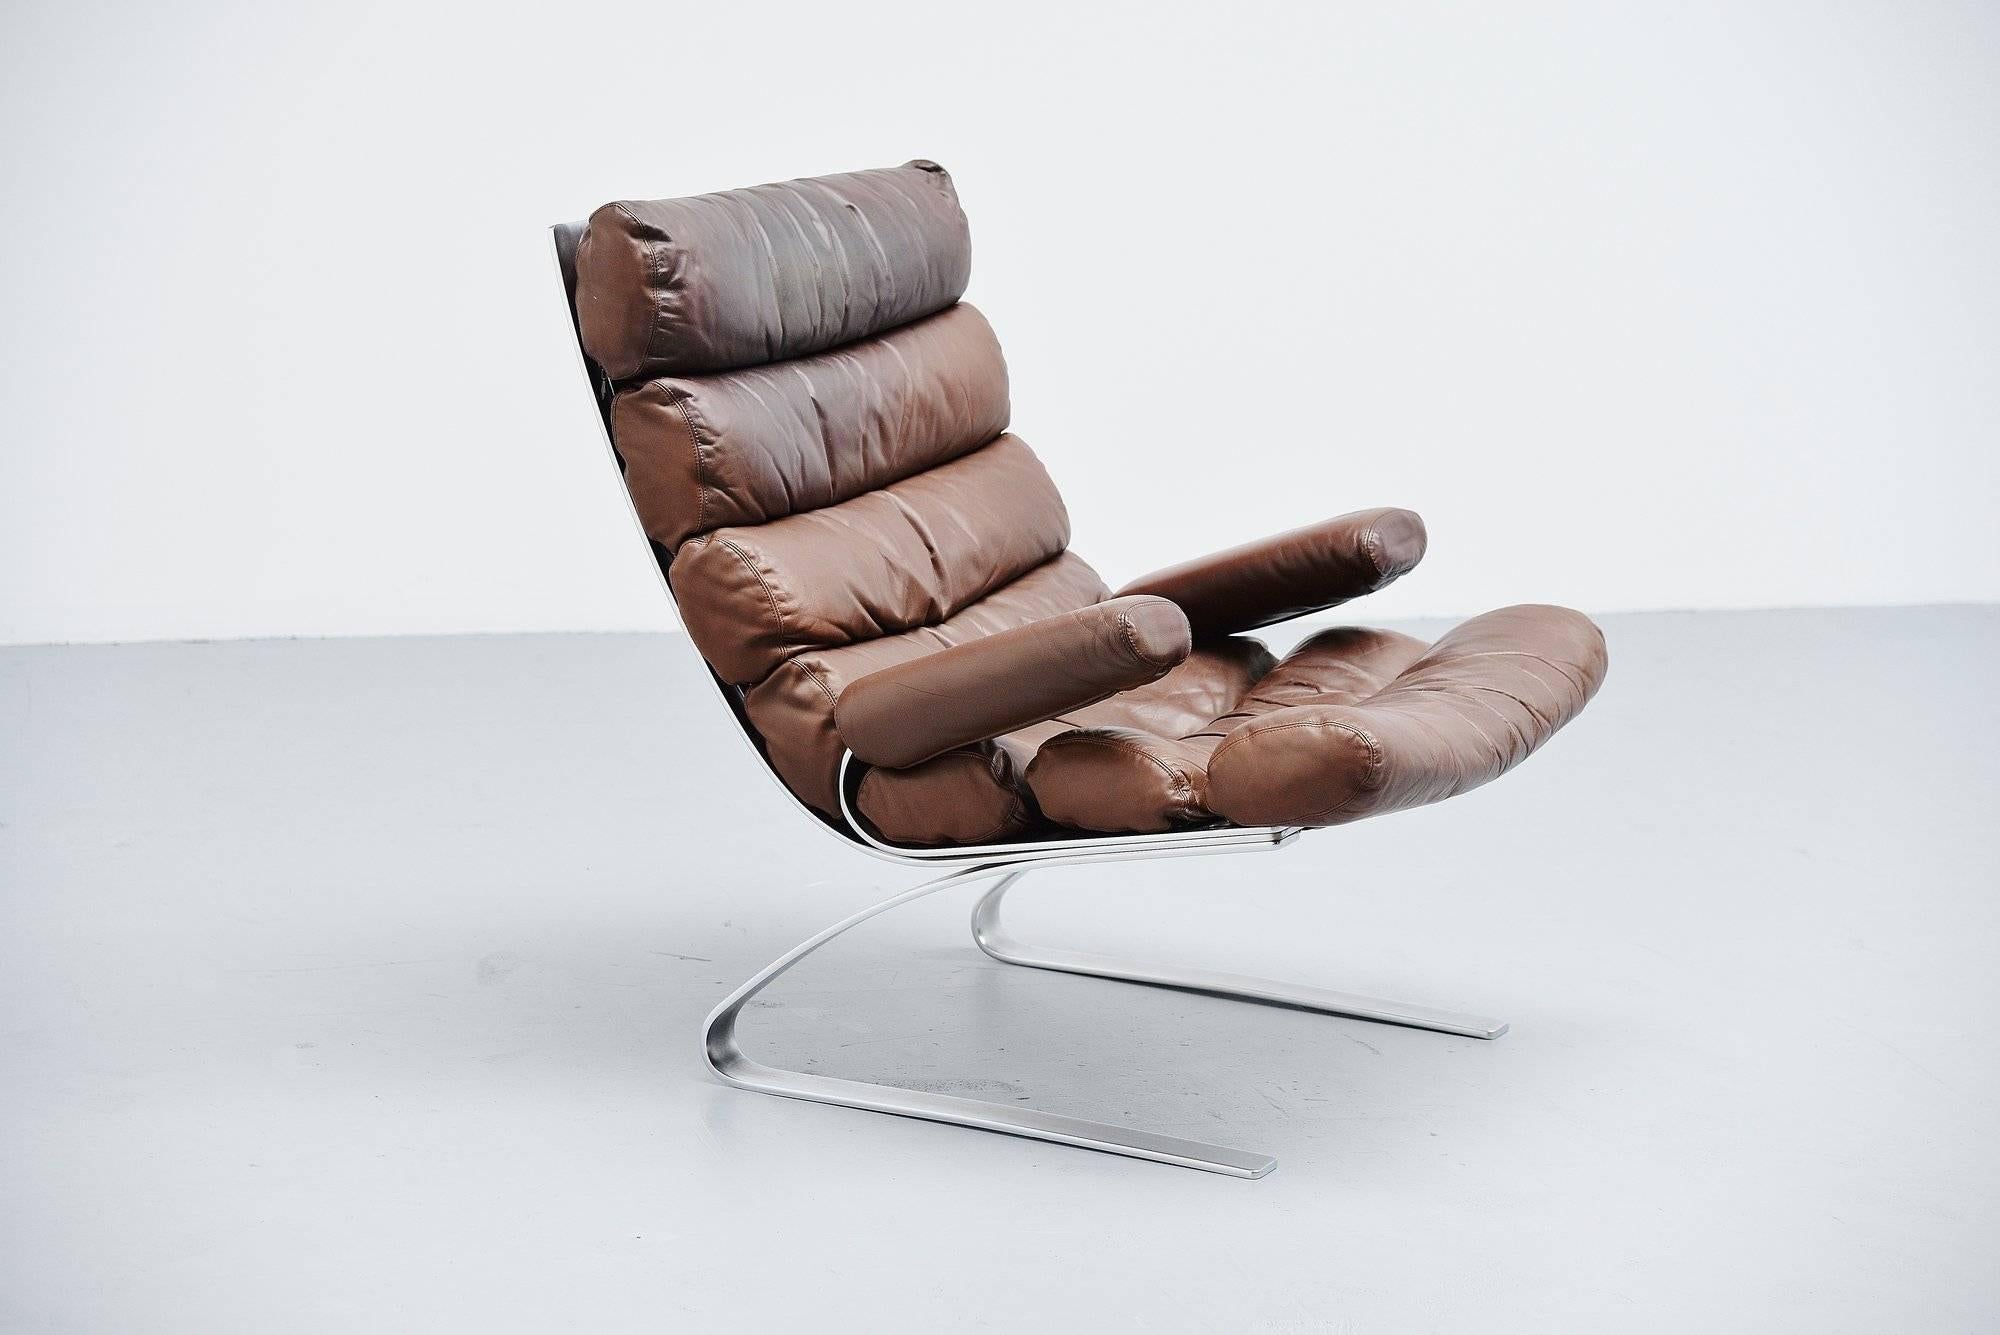 Comfortable large 'Sinus' lounge chair designed by Reinhold Adolf & Hans Jürgen Schröpfer, manufactured by COR Germany, 1976. The chair has a brushed steel frame and chocolate brown seat. This chair seats very comfortable and relaxing, the leather